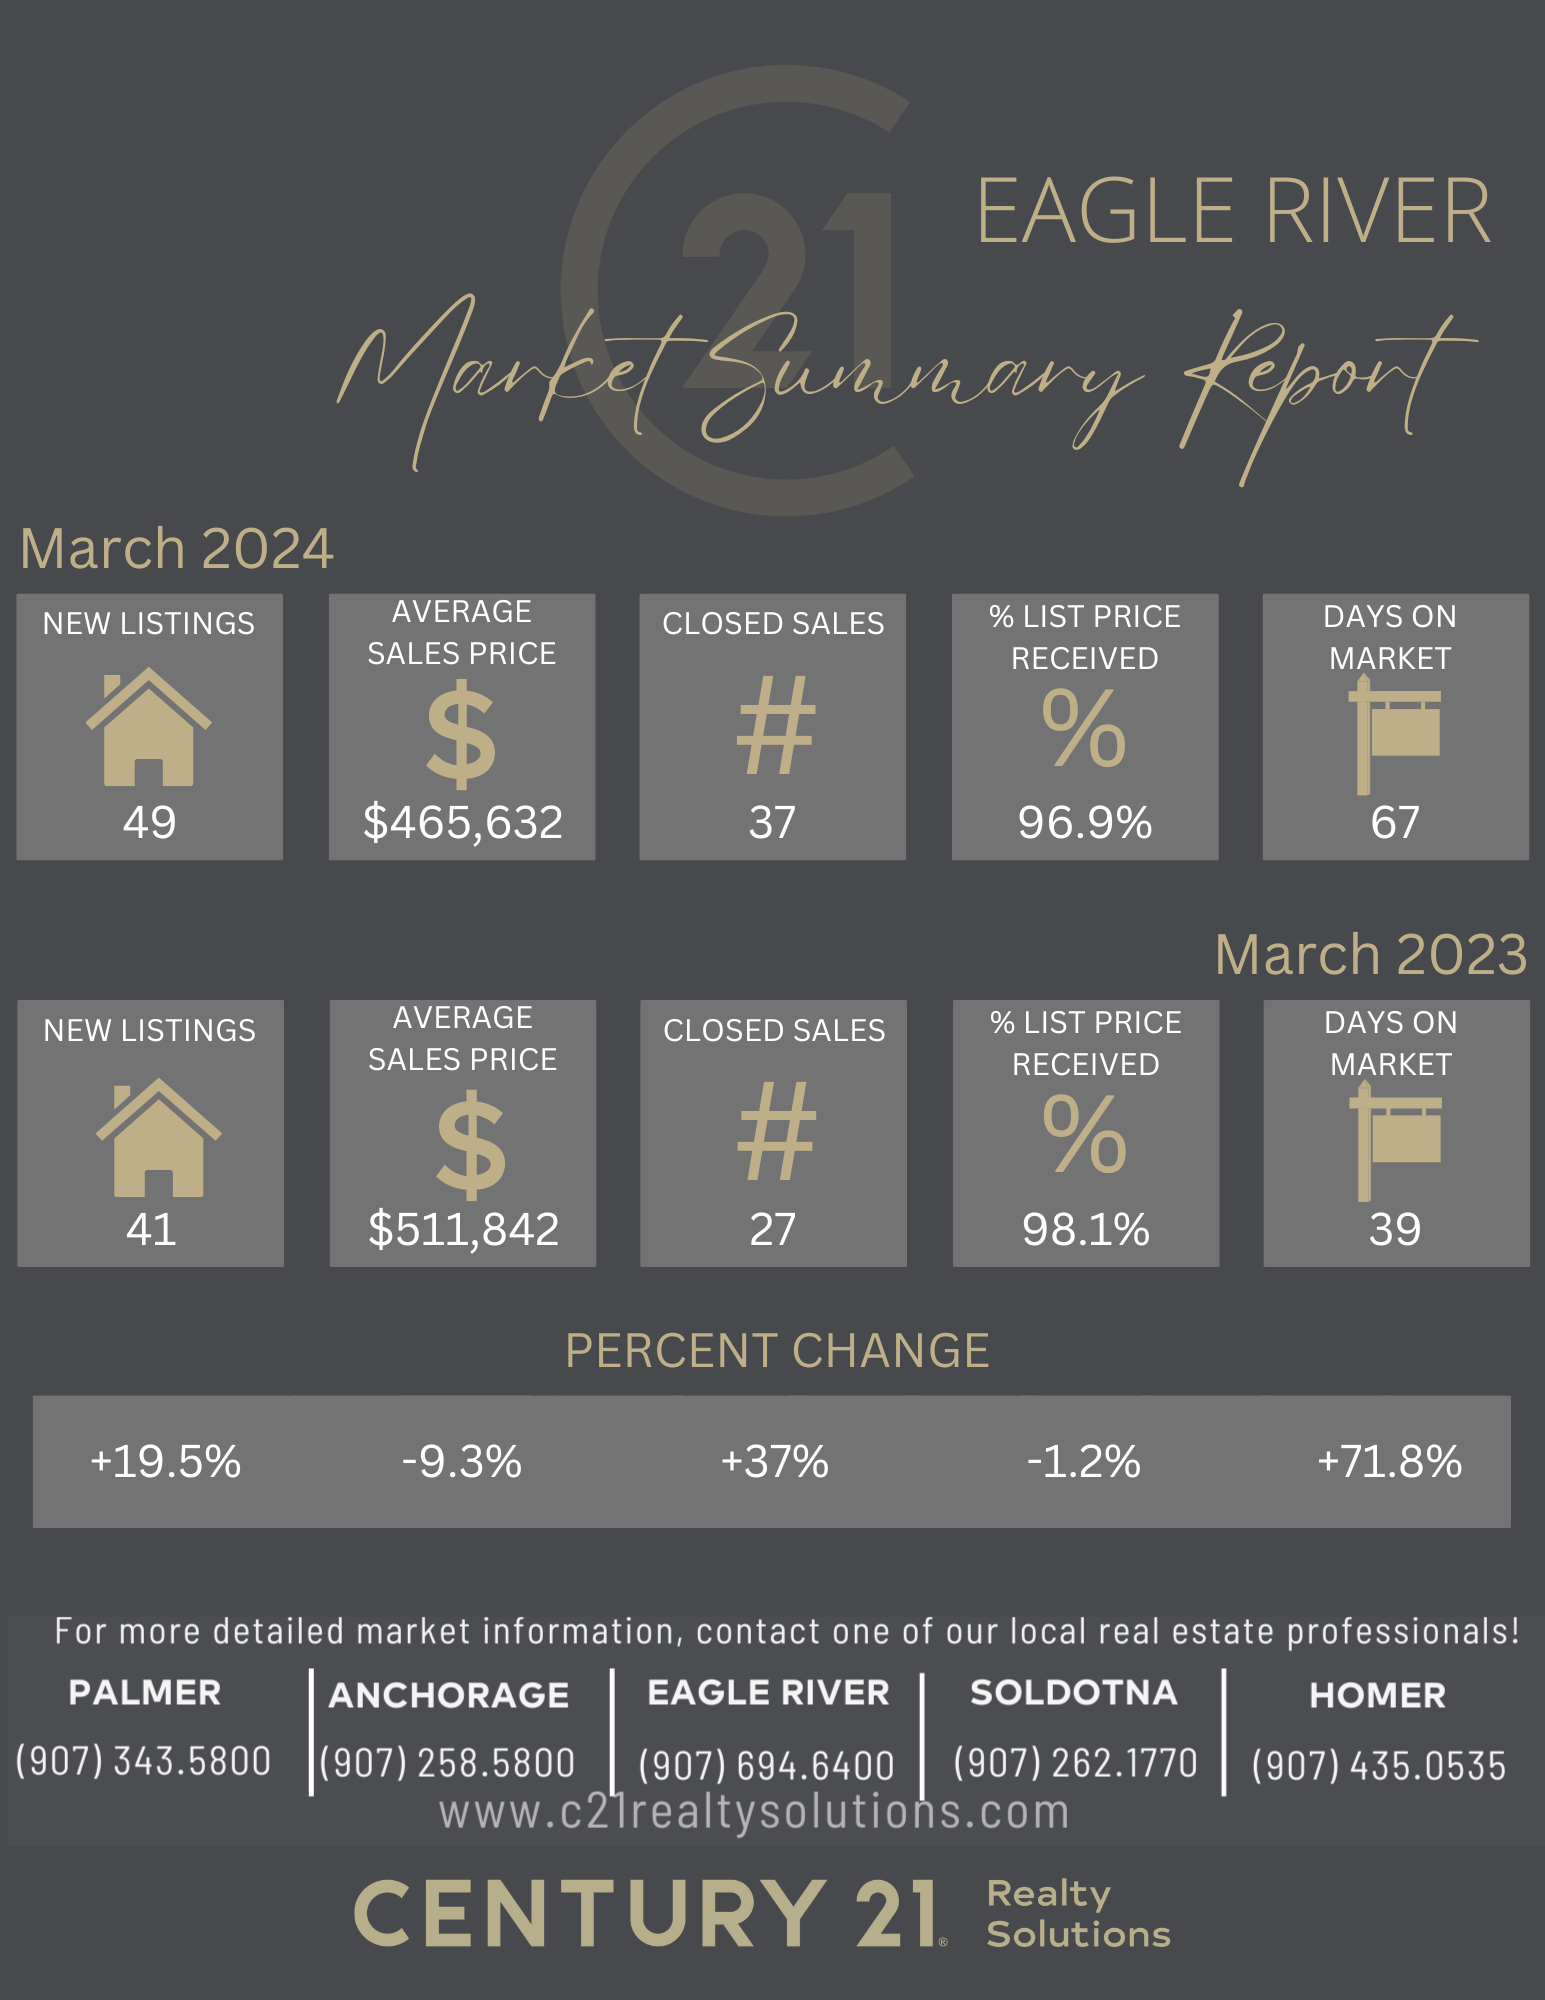 ER - MARCH 2024 Market Summary Report